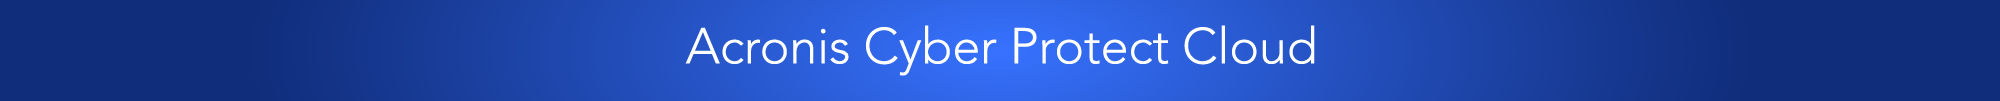 Acronis Cyber Protect Cloud blue banner 